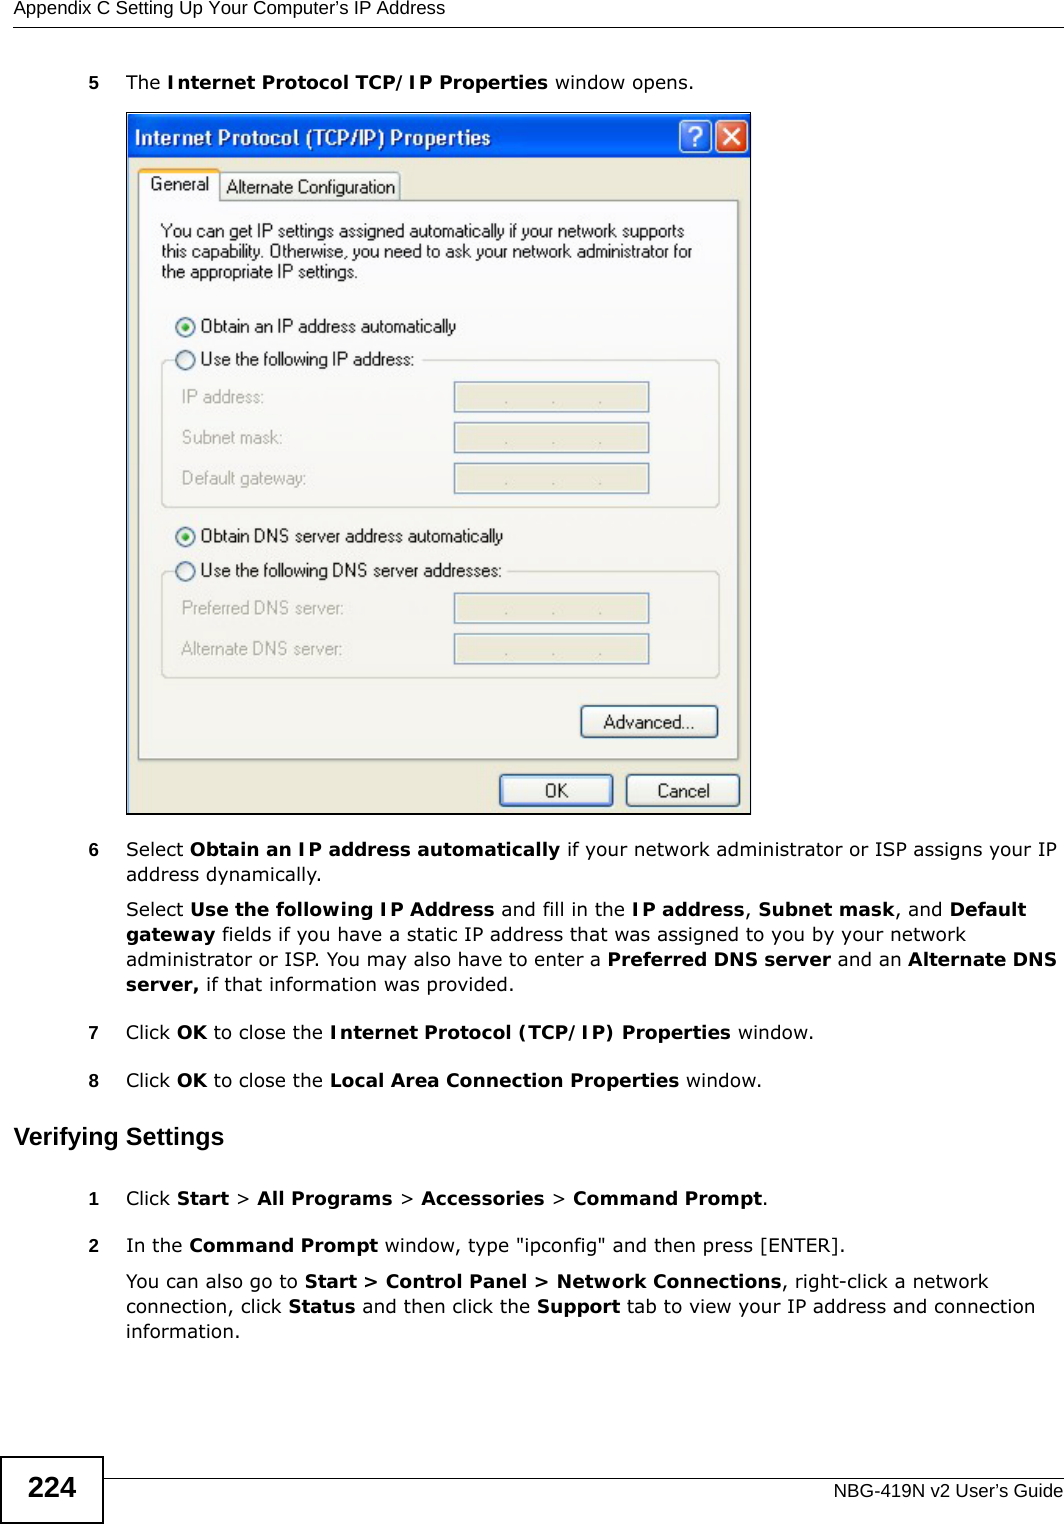 Appendix C Setting Up Your Computer’s IP AddressNBG-419N v2 User’s Guide2245The Internet Protocol TCP/IP Properties window opens.6Select Obtain an IP address automatically if your network administrator or ISP assigns your IP address dynamically.Select Use the following IP Address and fill in the IP address, Subnet mask, and Default gateway fields if you have a static IP address that was assigned to you by your network administrator or ISP. You may also have to enter a Preferred DNS server and an Alternate DNS server, if that information was provided.7Click OK to close the Internet Protocol (TCP/IP) Properties window.8Click OK to close the Local Area Connection Properties window.Verifying Settings1Click Start &gt; All Programs &gt; Accessories &gt; Command Prompt.2In the Command Prompt window, type &quot;ipconfig&quot; and then press [ENTER]. You can also go to Start &gt; Control Panel &gt; Network Connections, right-click a network connection, click Status and then click the Support tab to view your IP address and connection information.